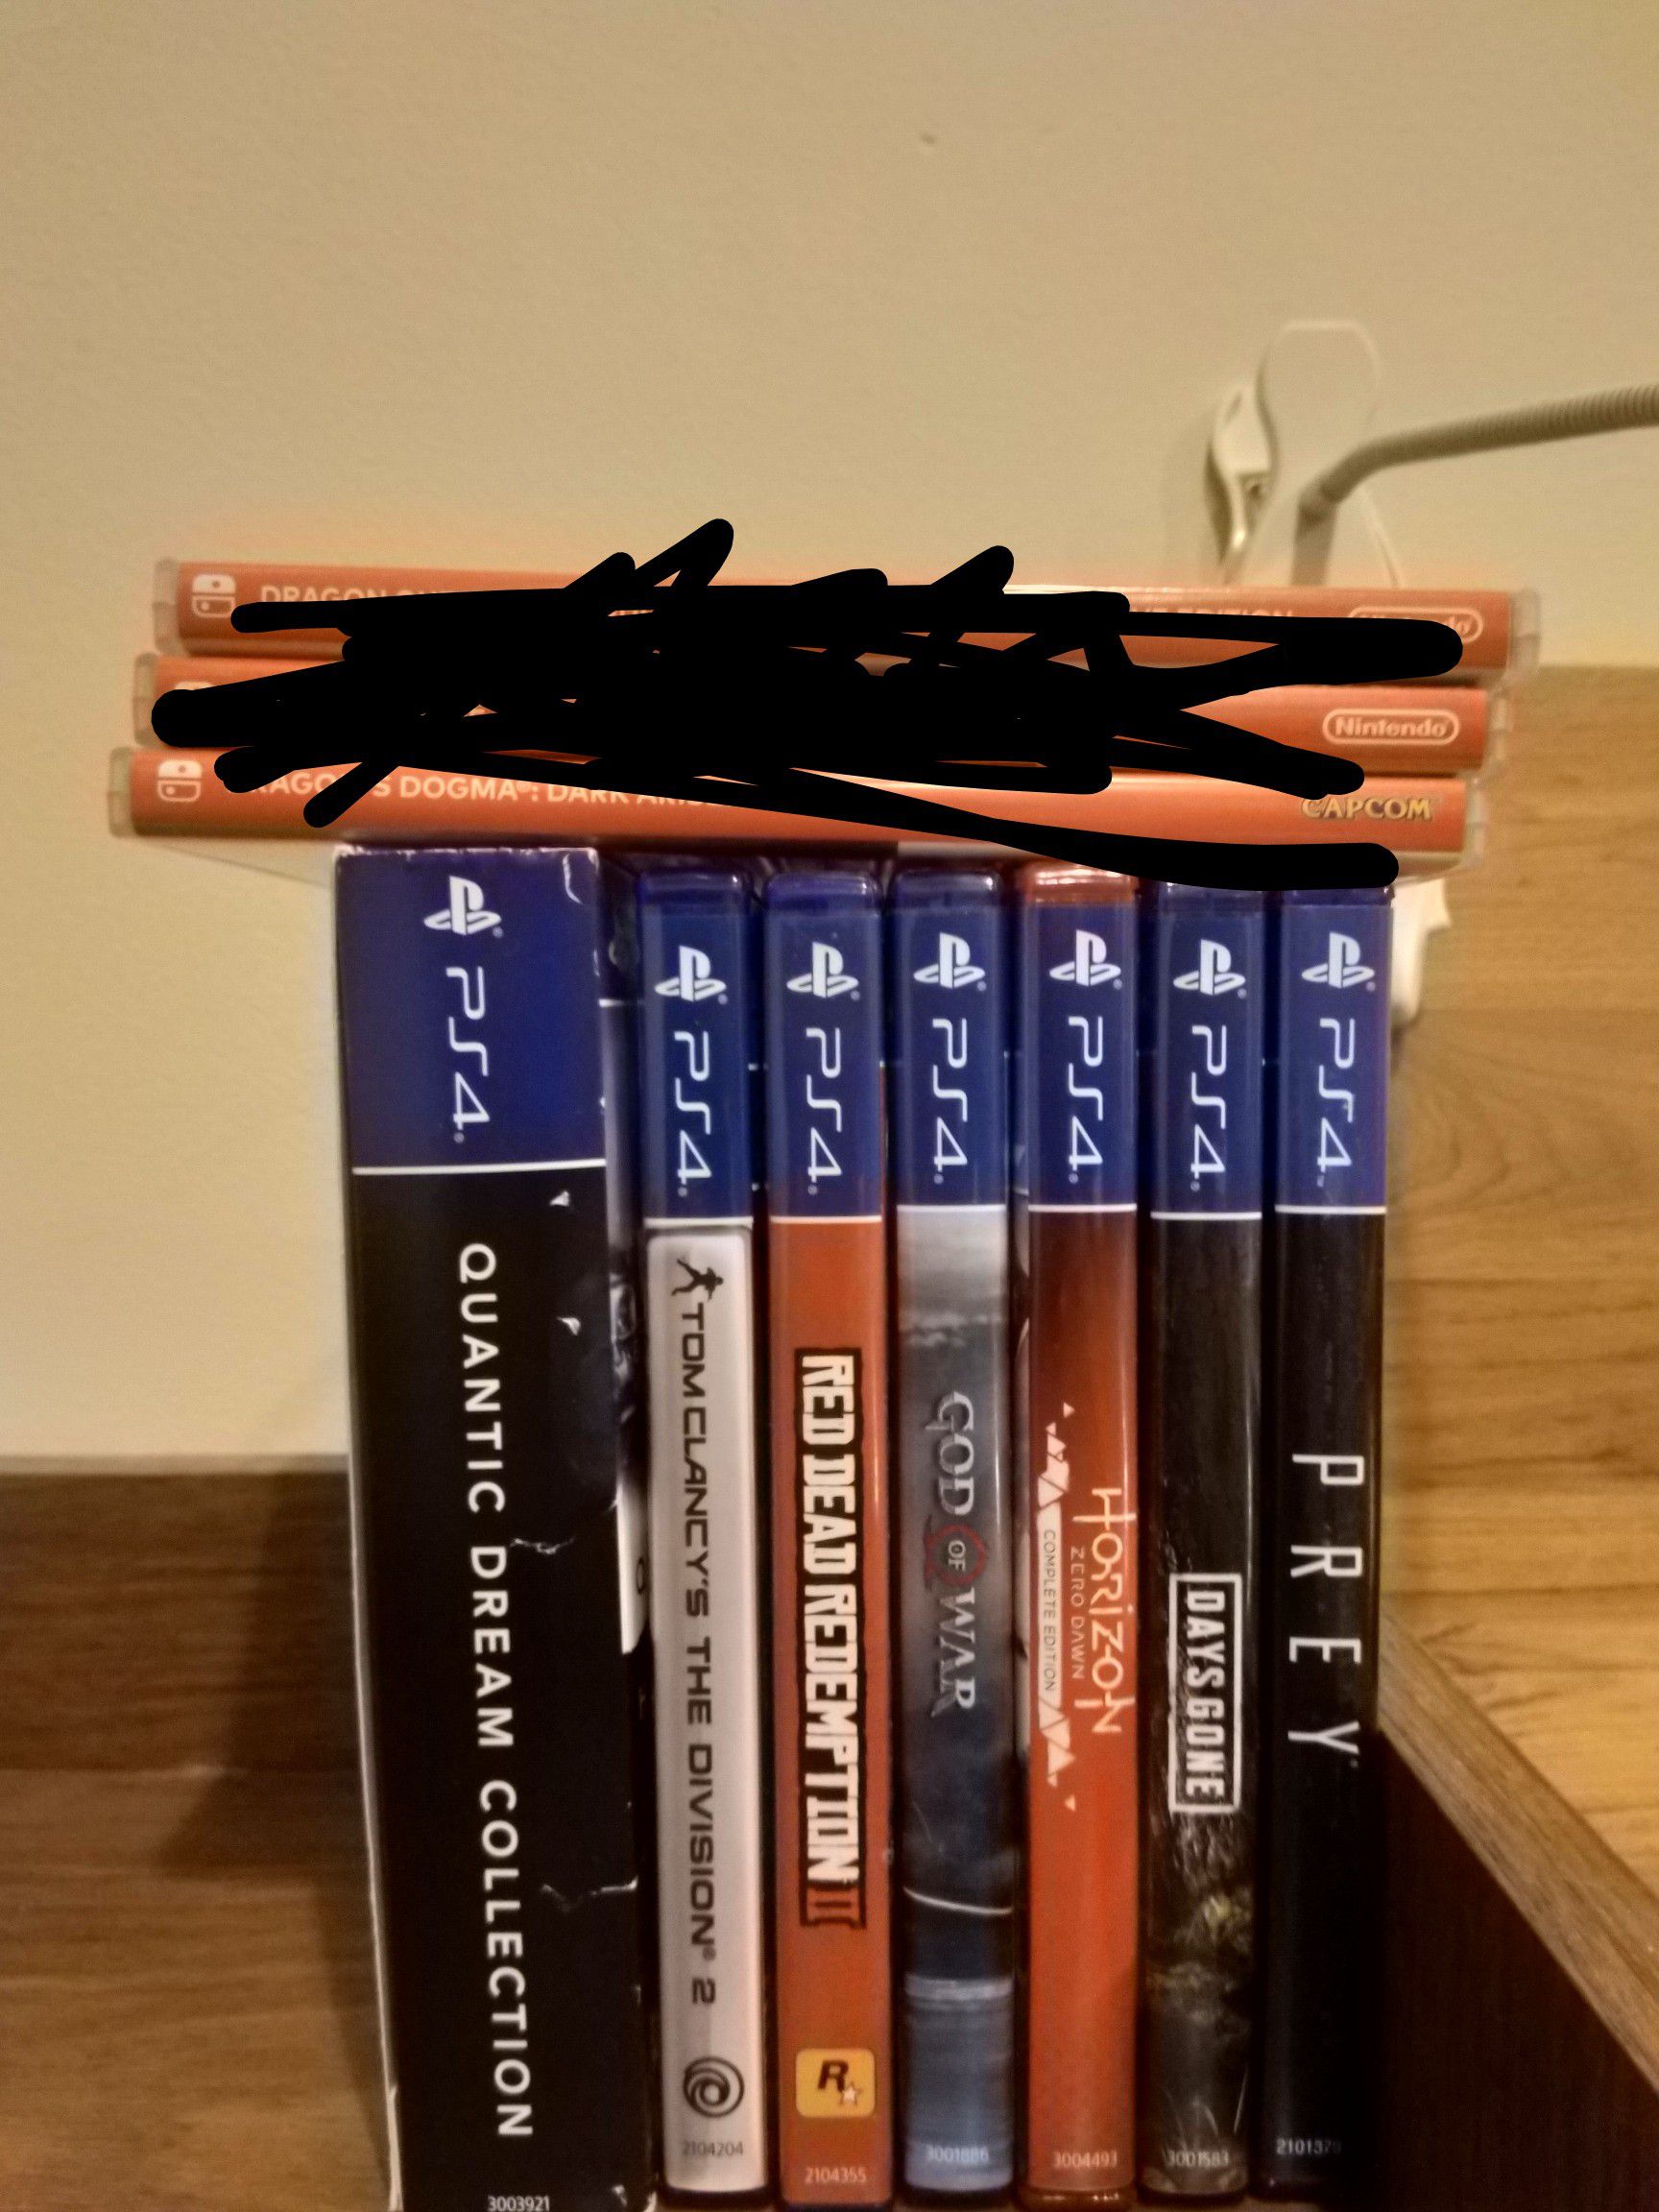 PS4 Games for sale